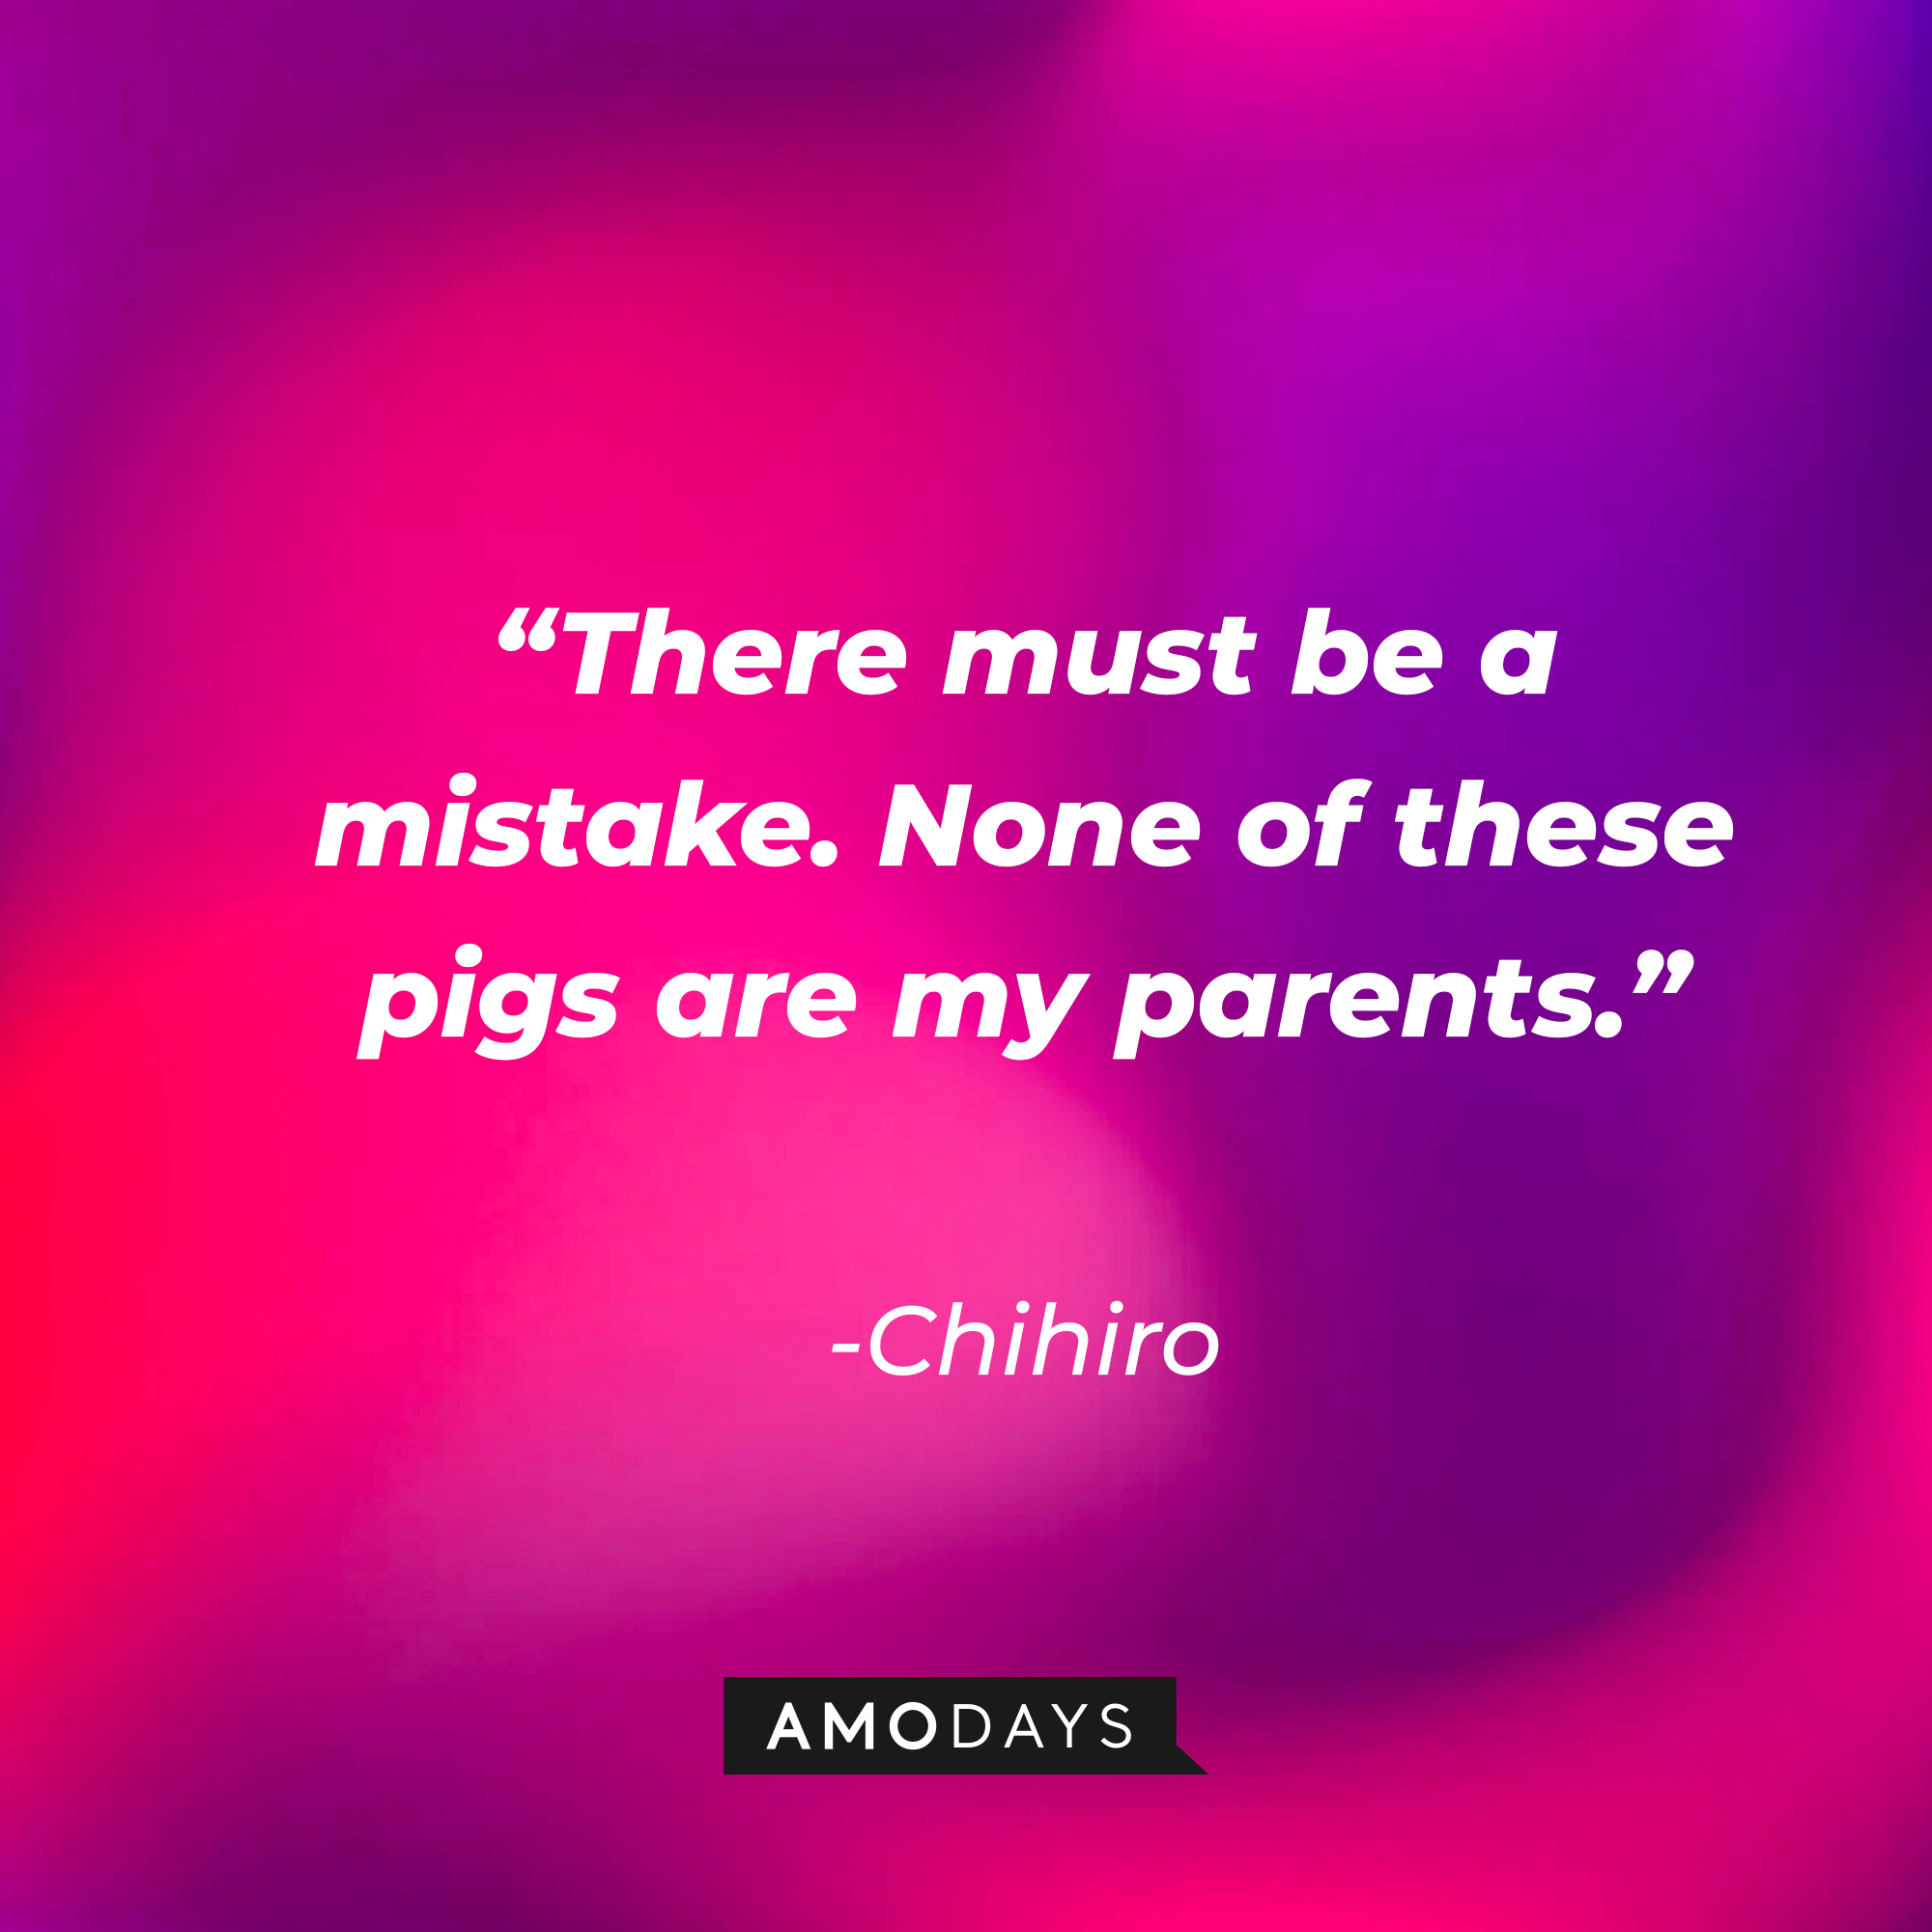 Chihiro’s quote: “There must be a mistake. None of these pigs are my parents.” | Source: AmoDays